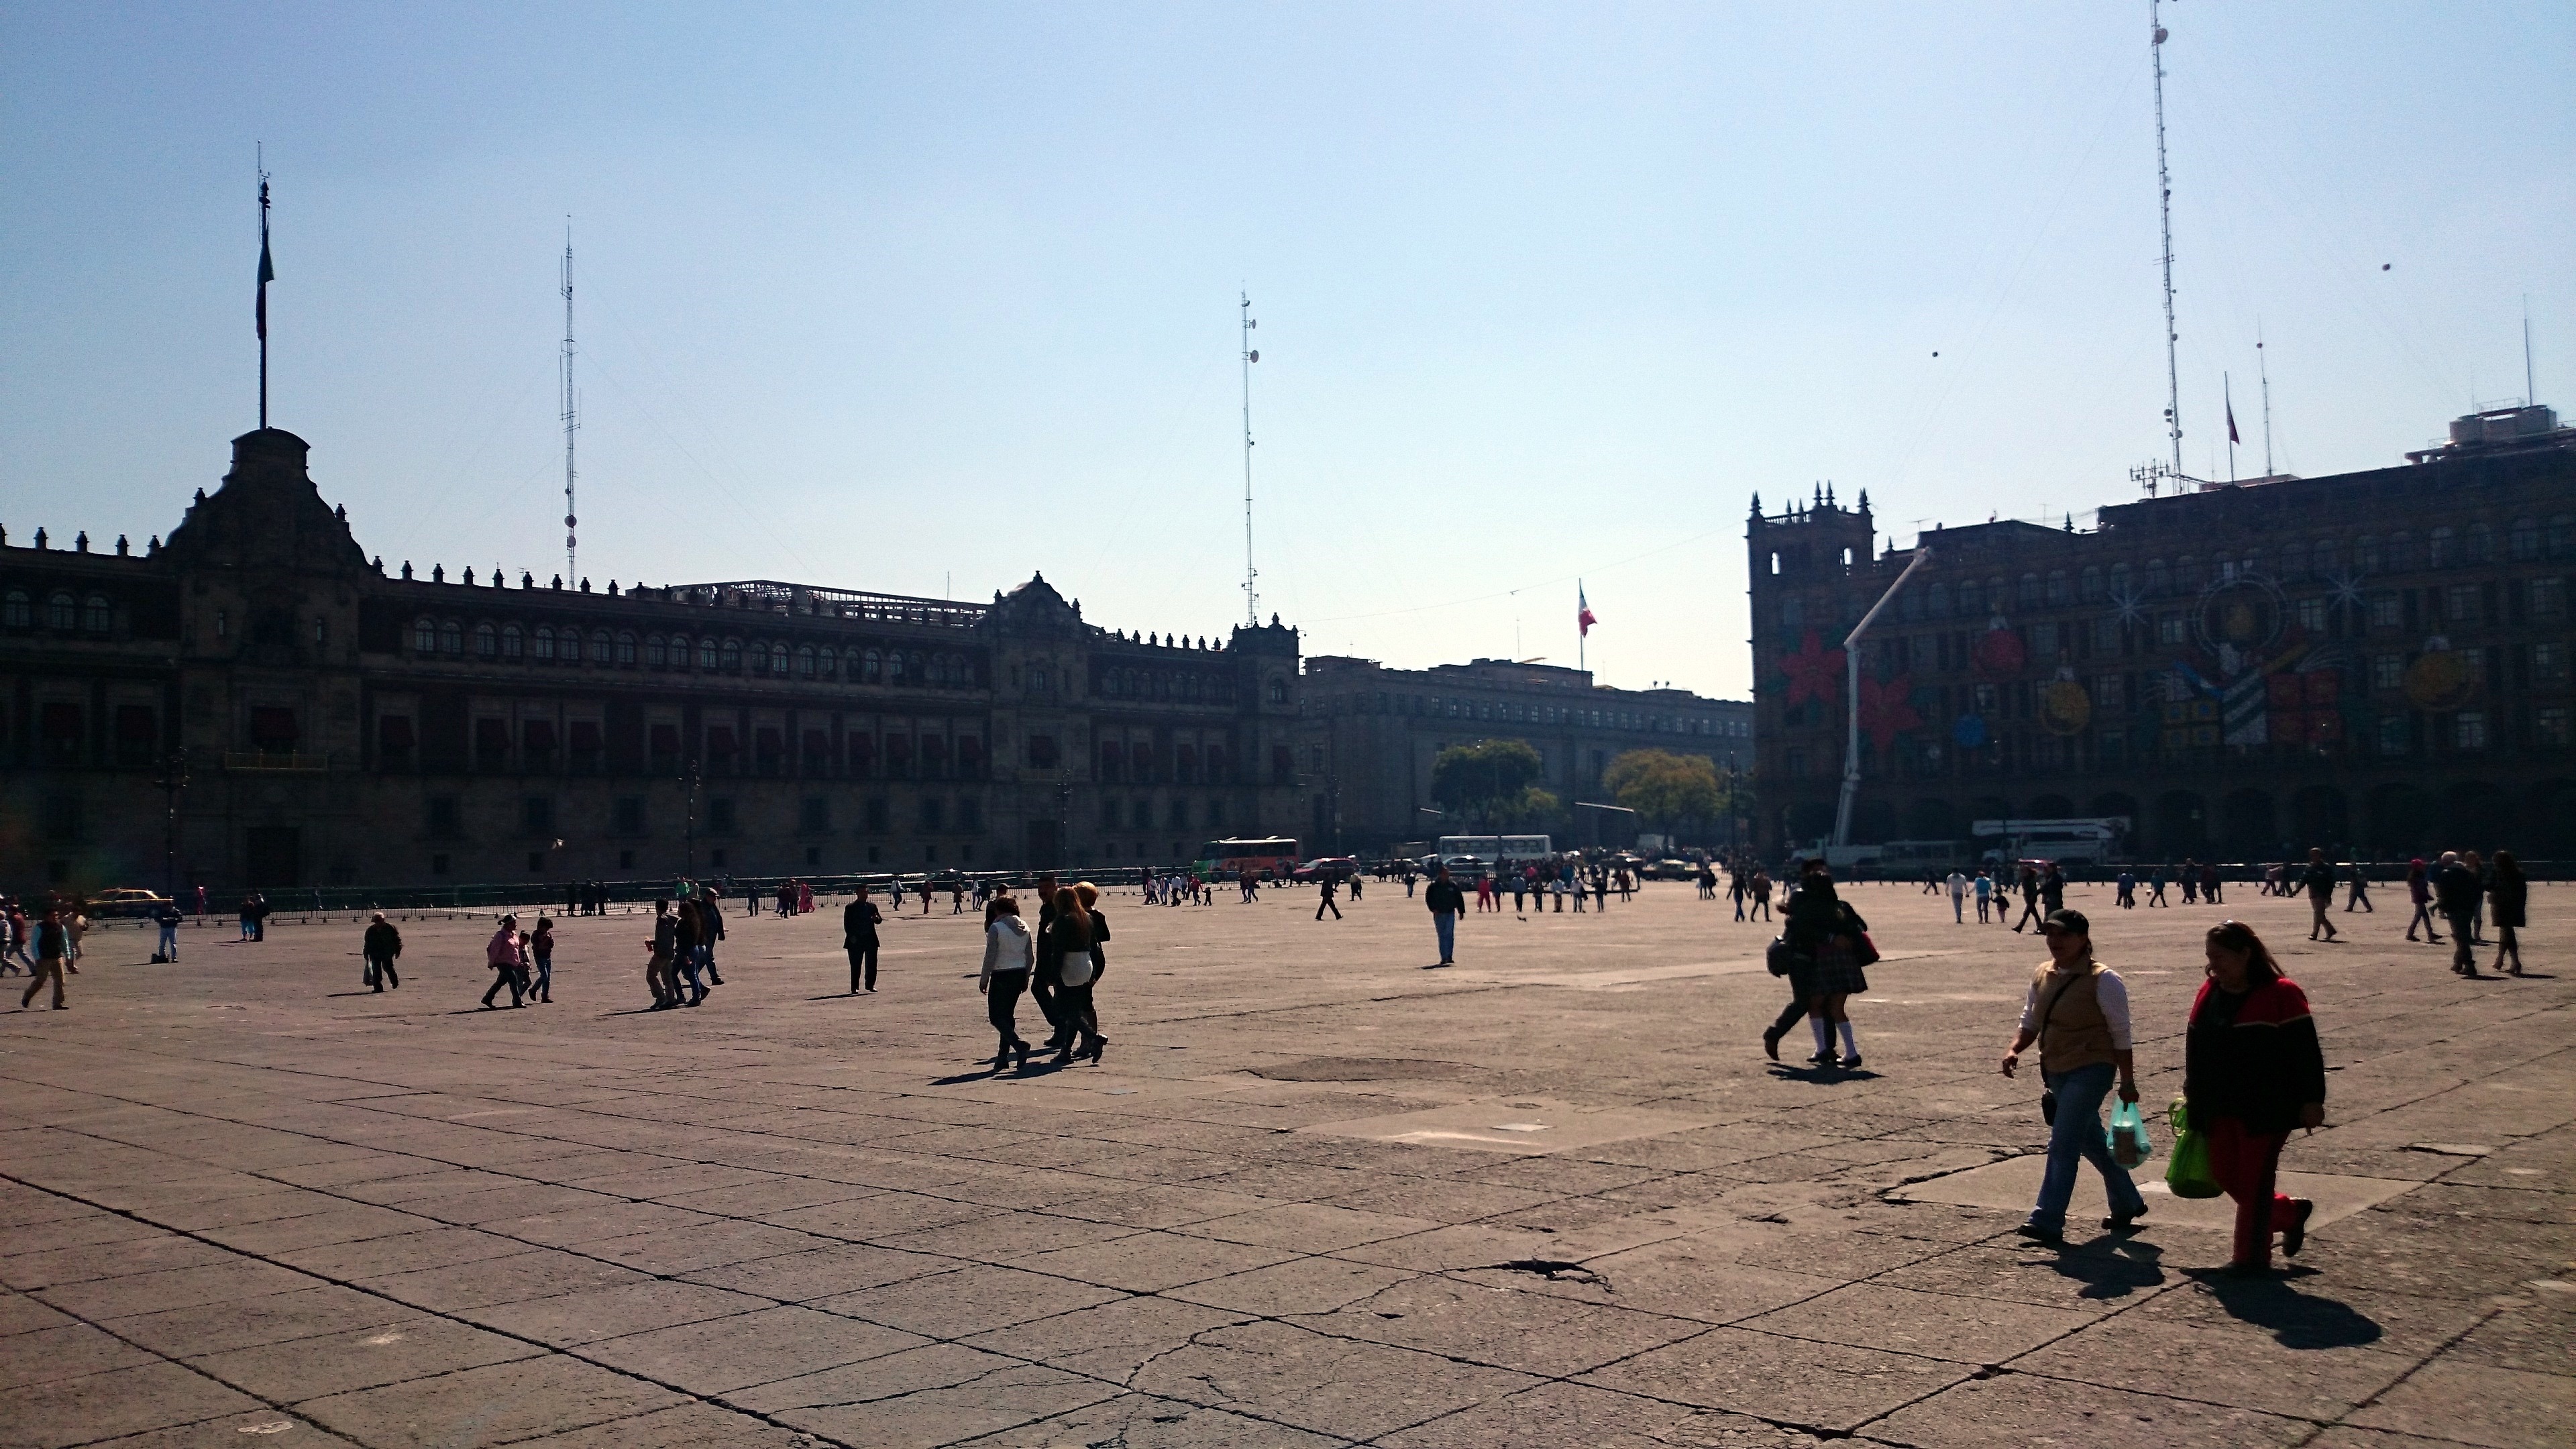 City Square: The National Palace at the Constitution Plaza in Mexico City, The Zocalo. 3840x2160 4K Wallpaper.